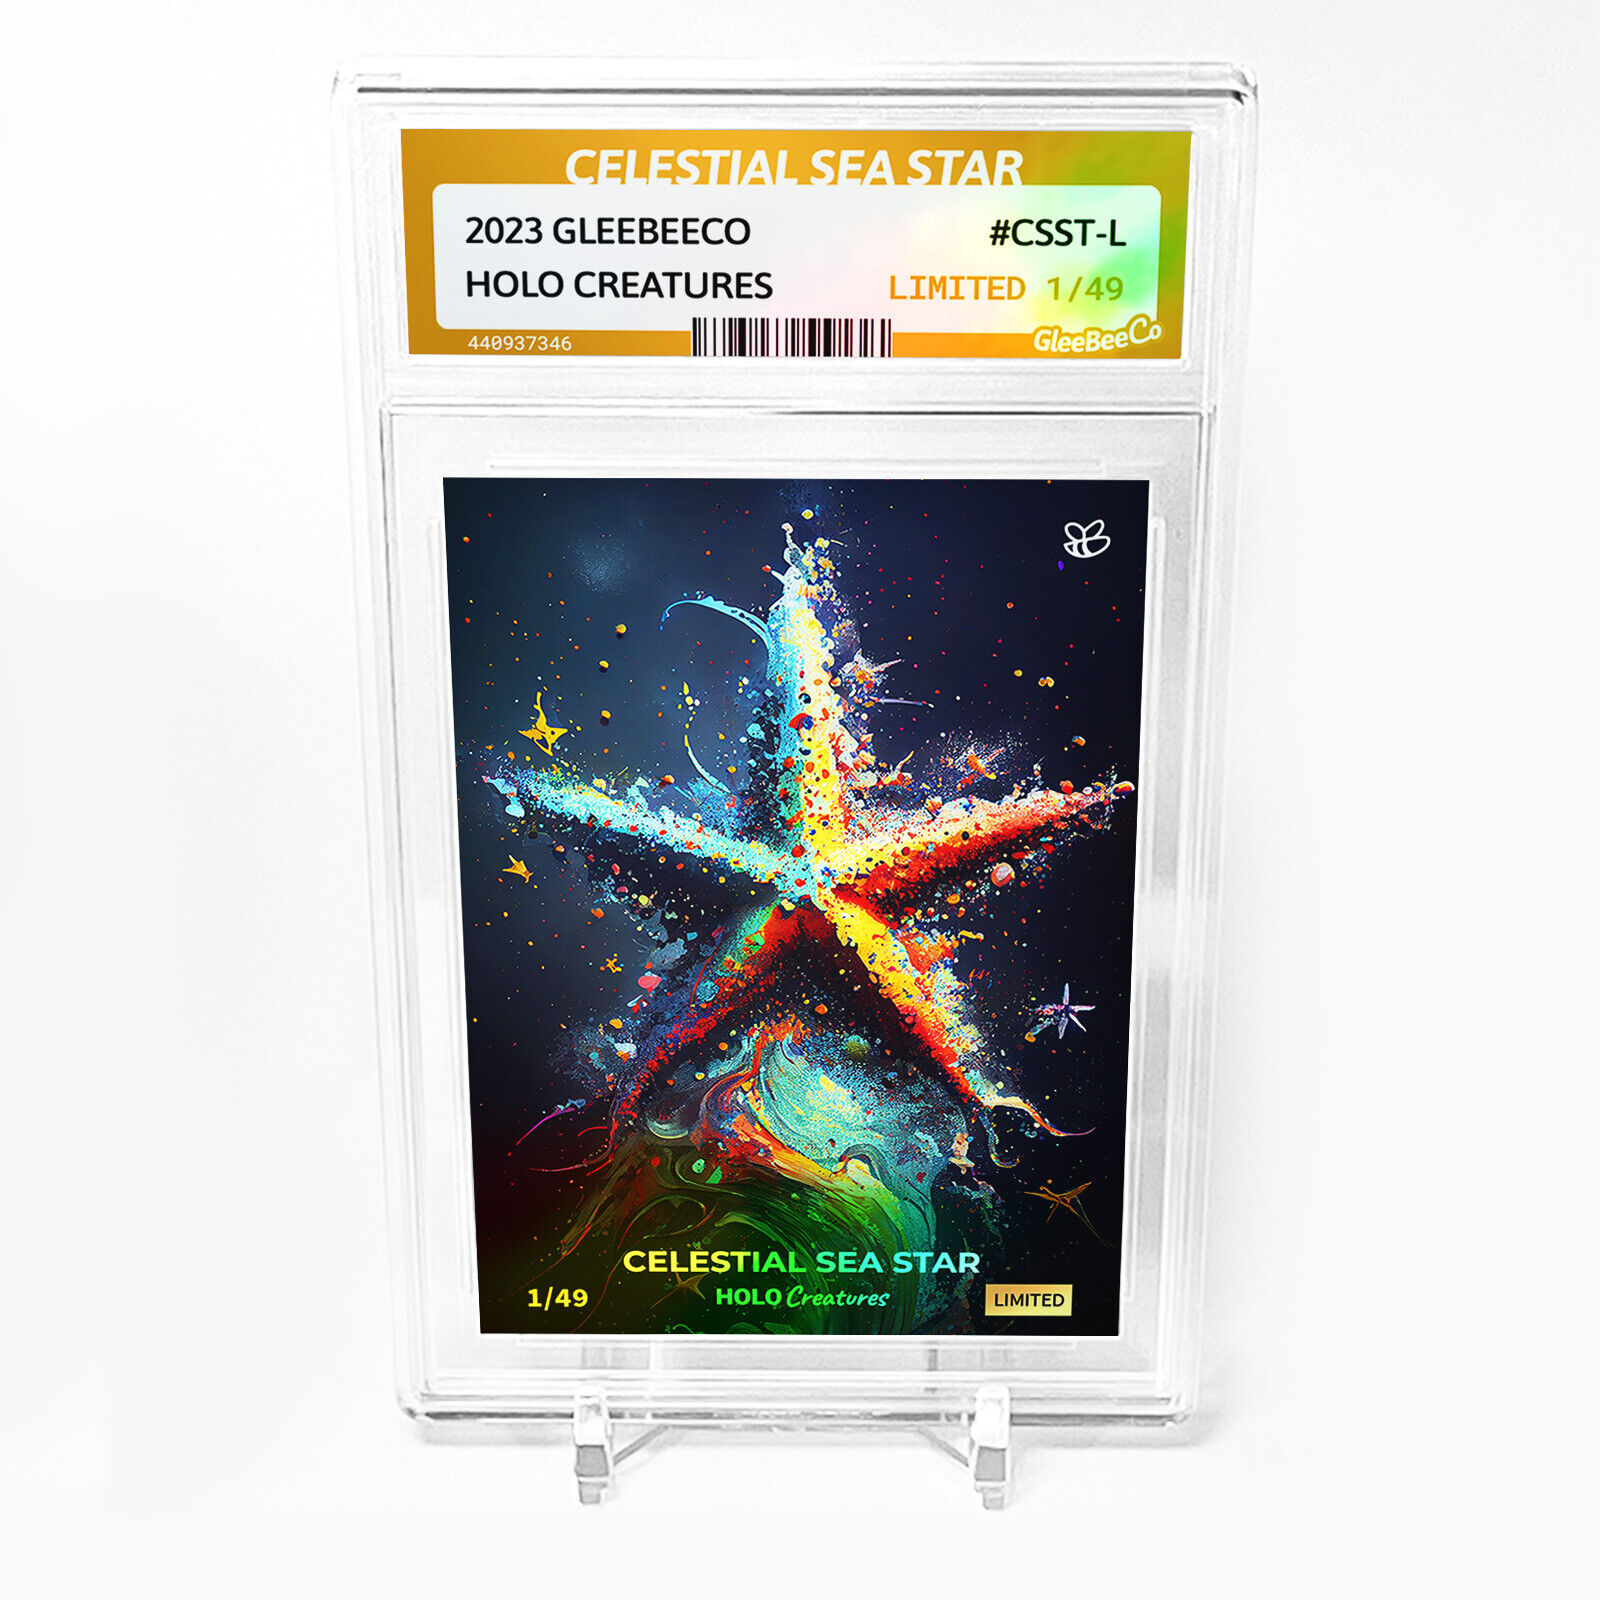 CELESTIAL SEA STAR Card GleeBeeCo Holo Creatures #CSST-L Limited to /49